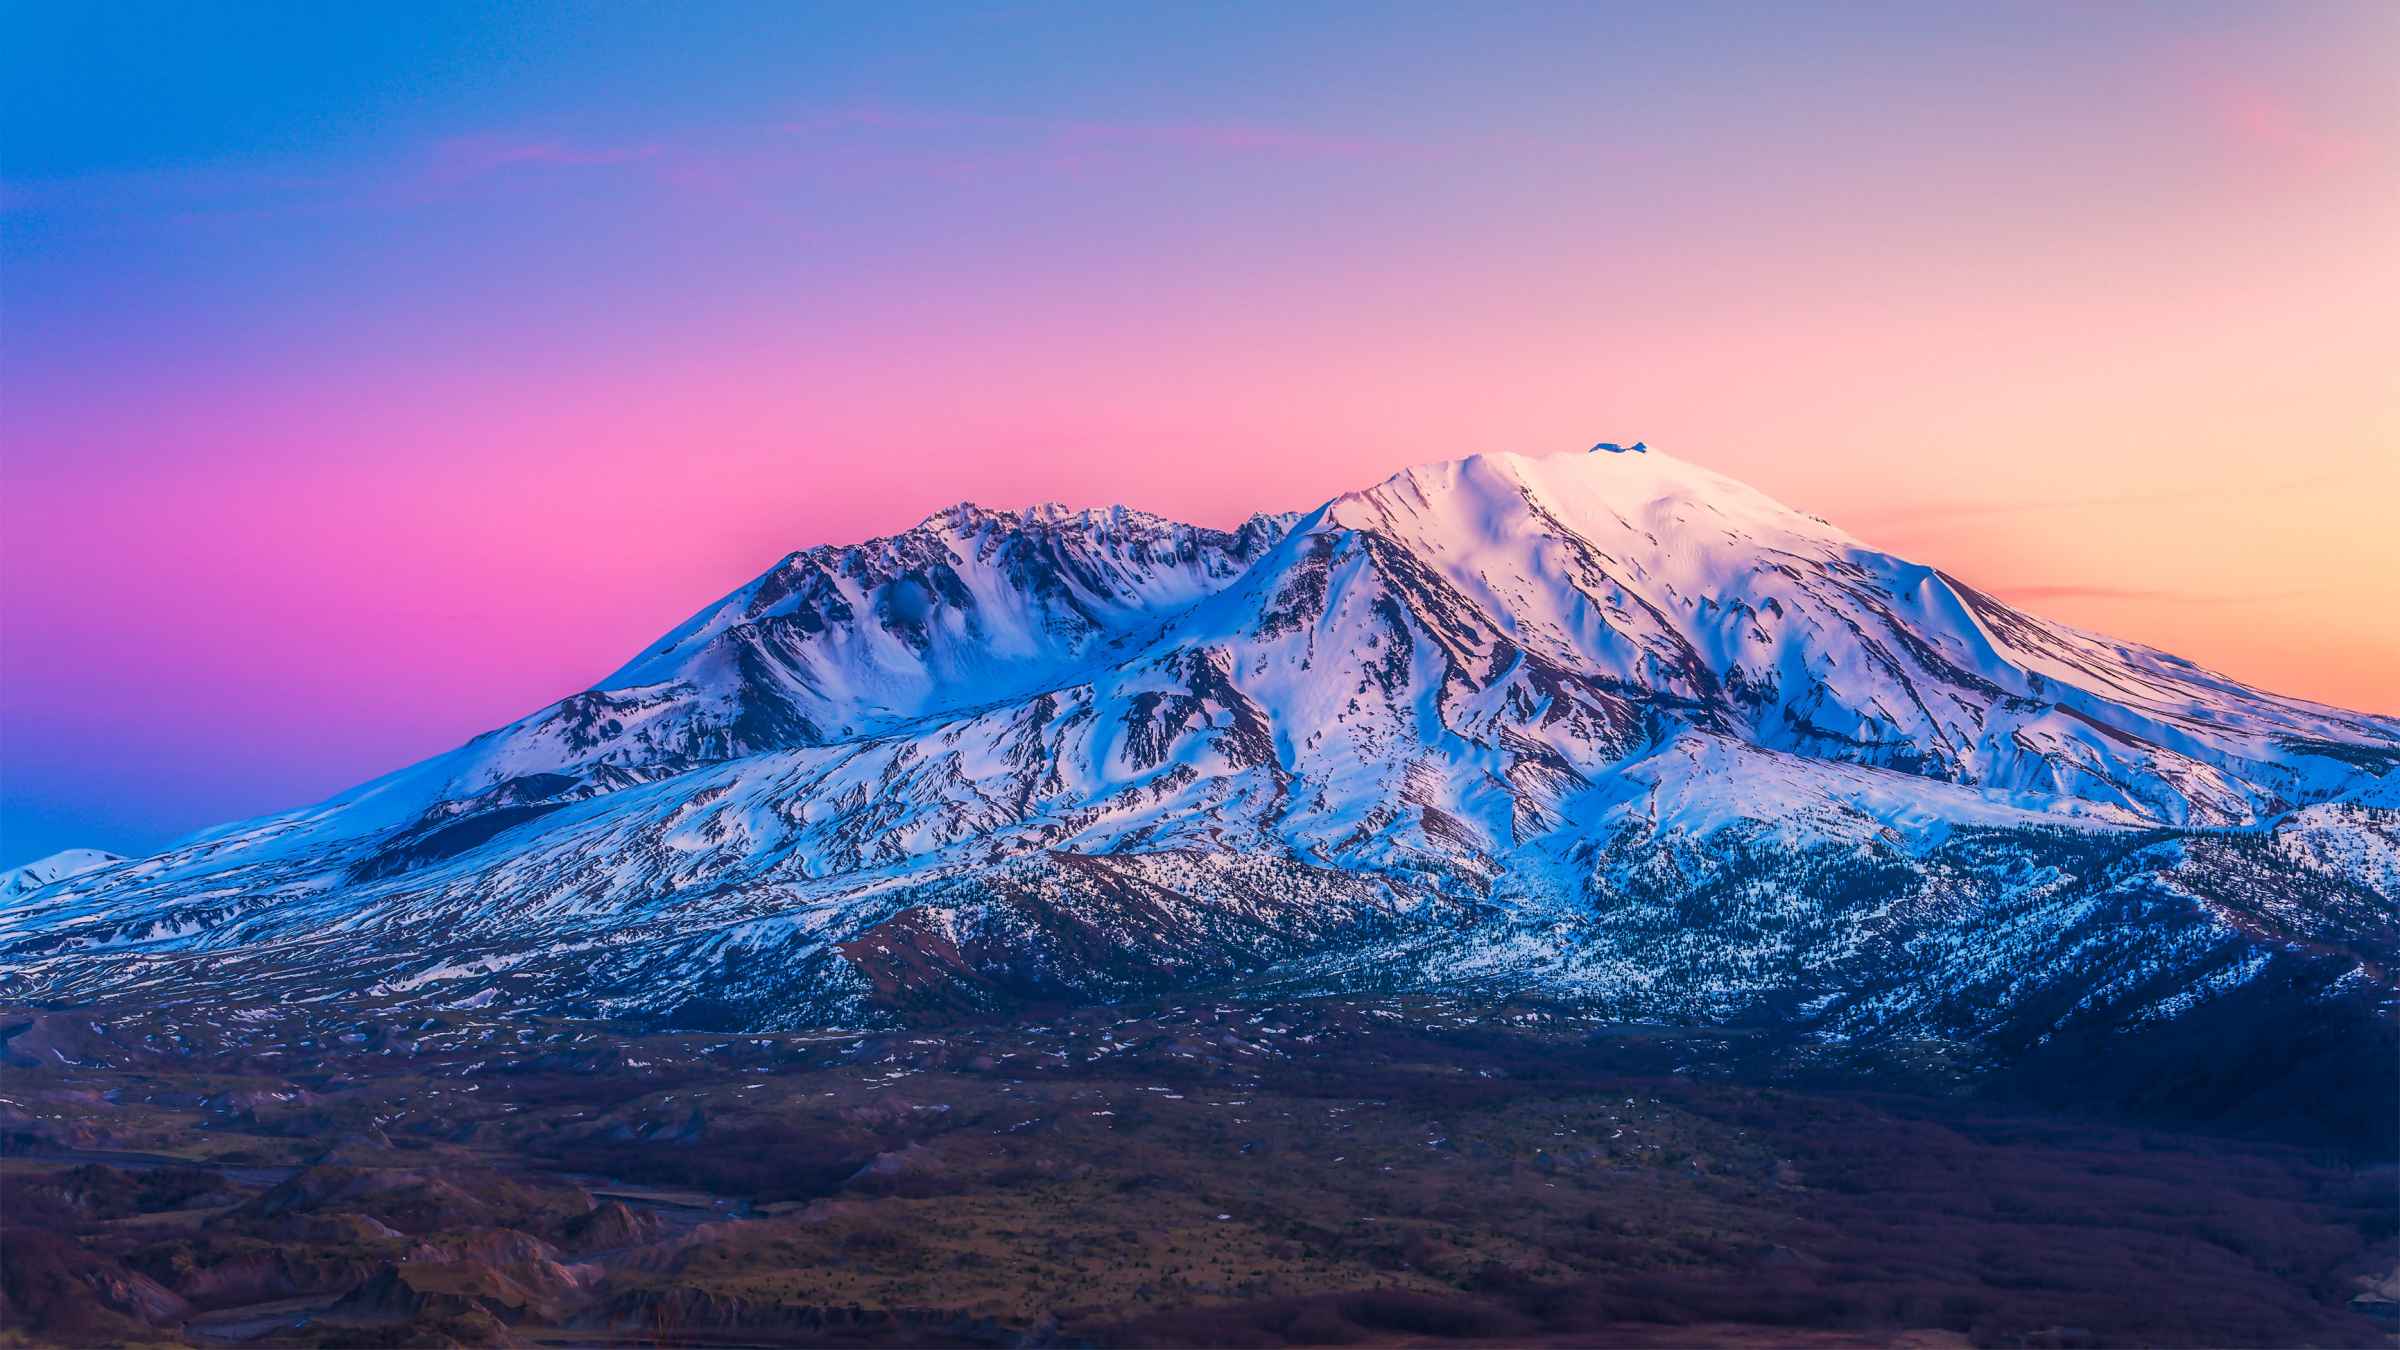 The BEST Mount Saint Helens Off the beaten track 2022 FREE